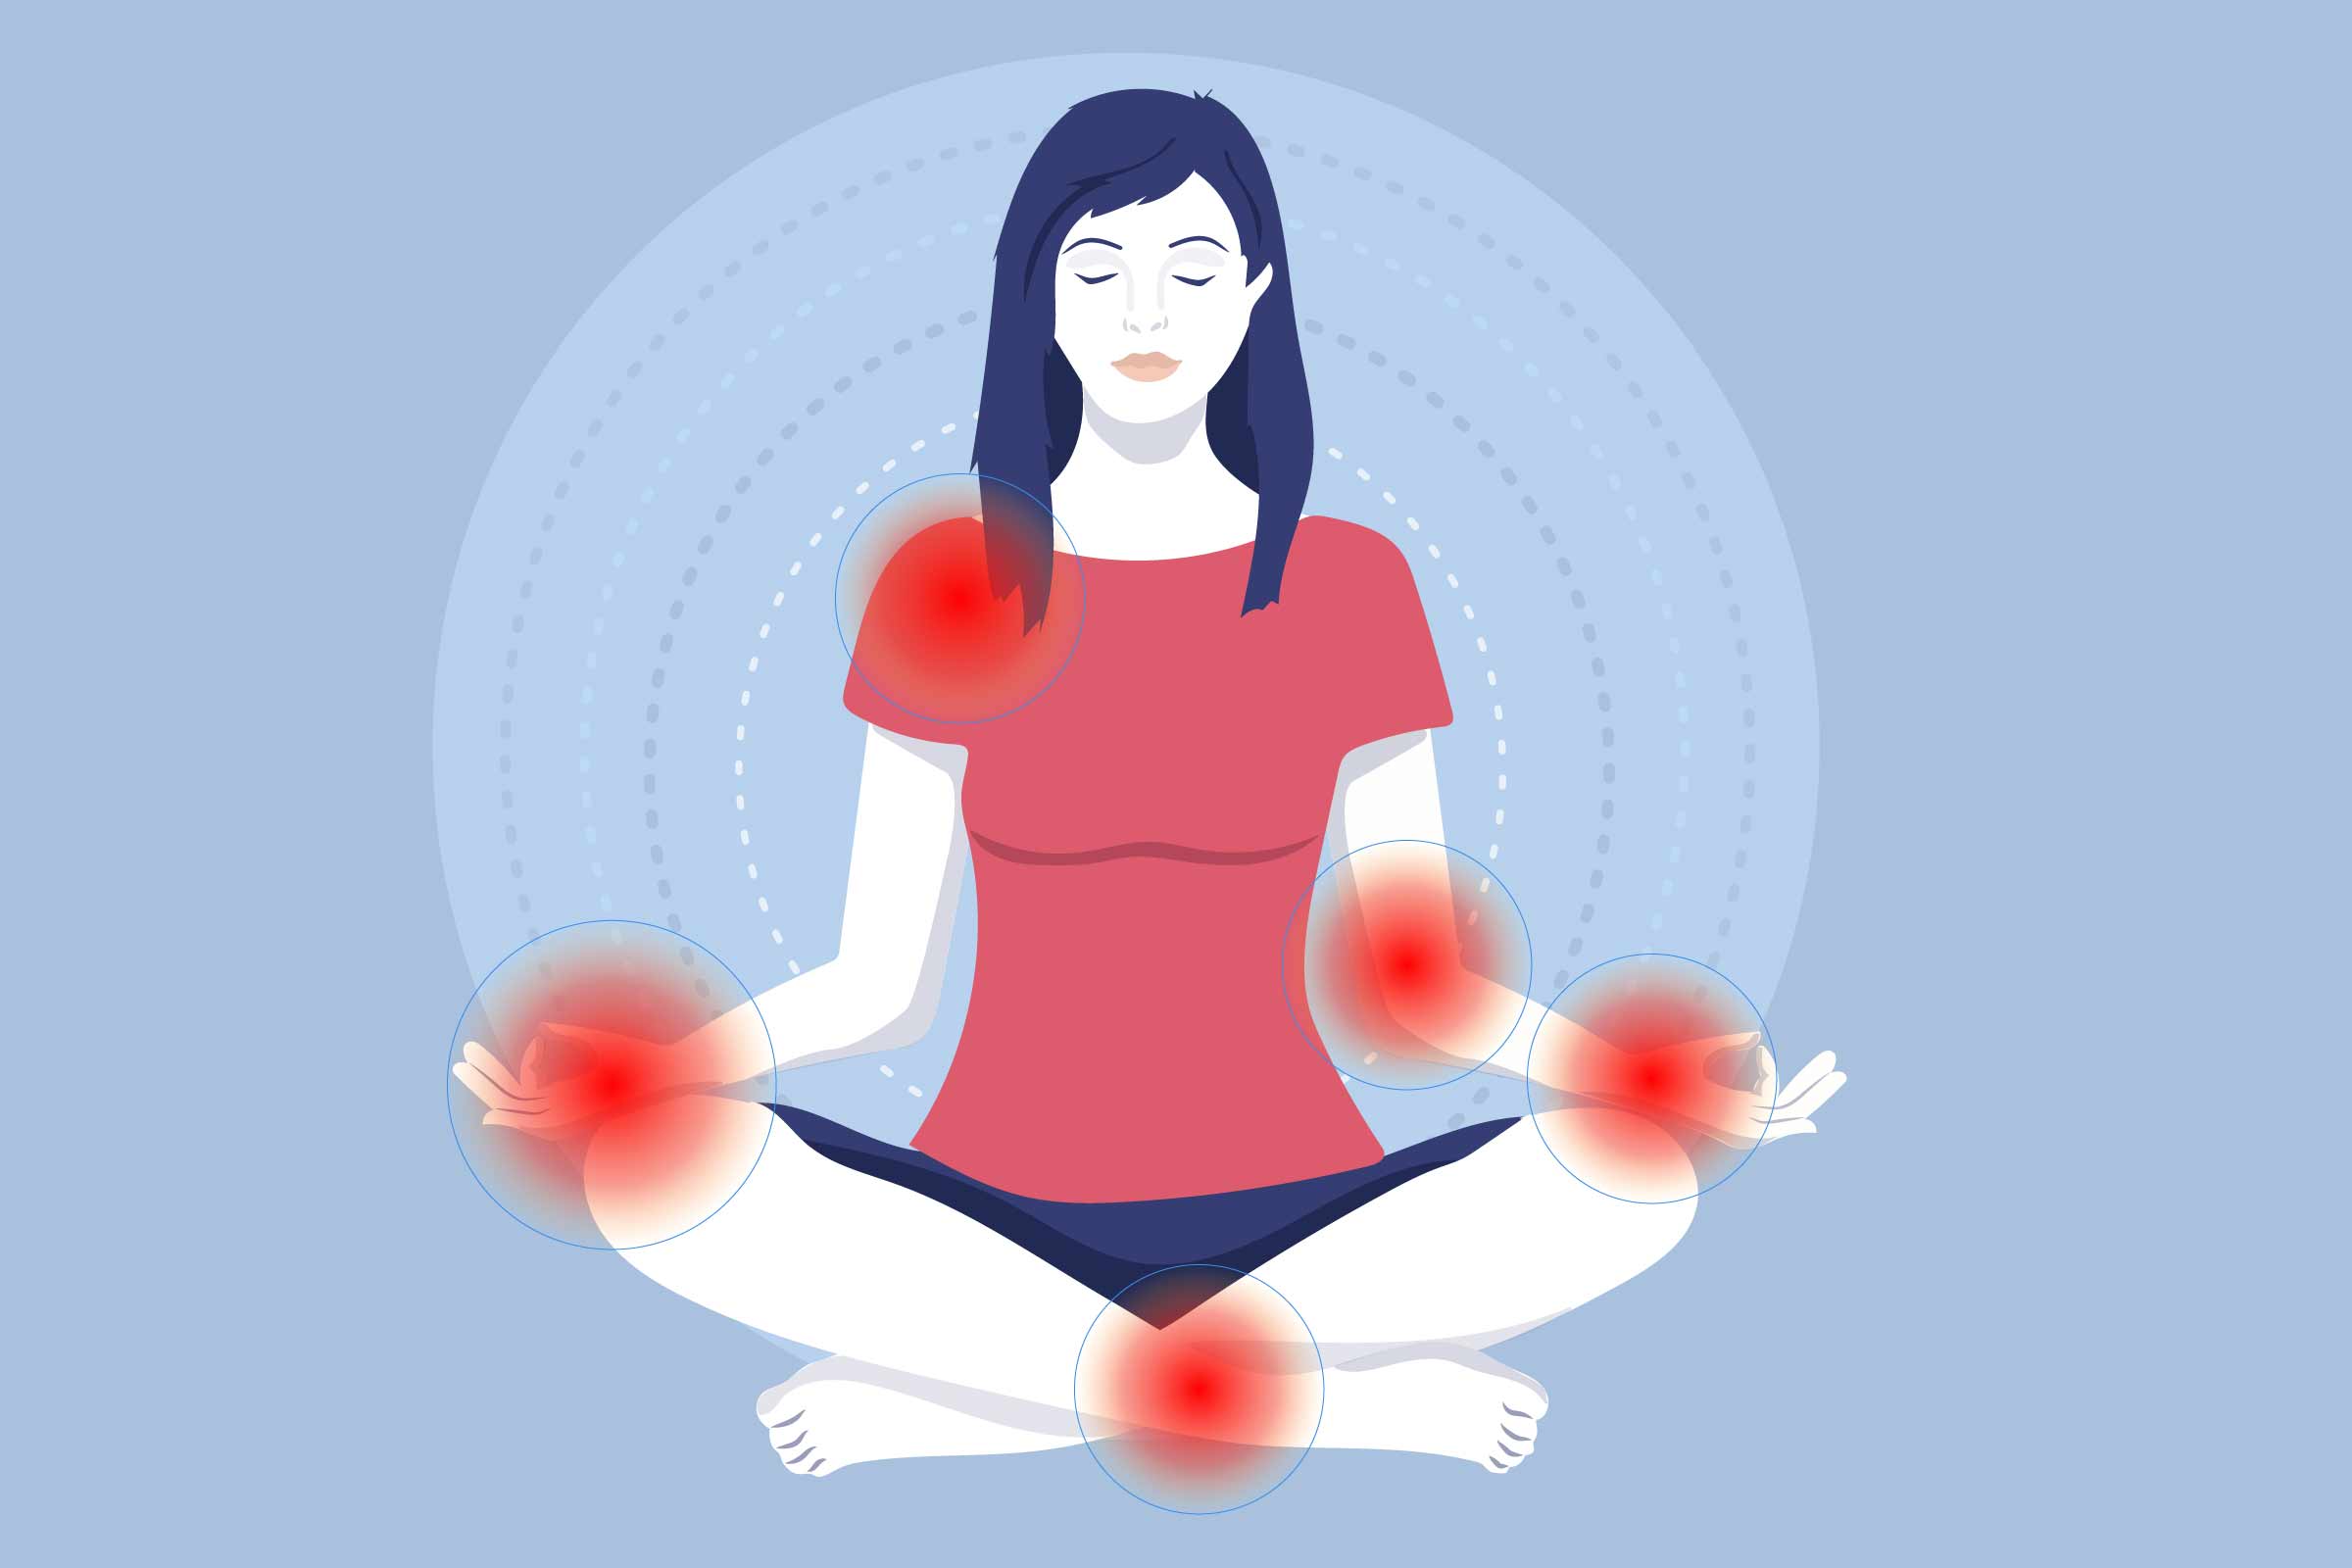 What role does meditation play in pain relief?